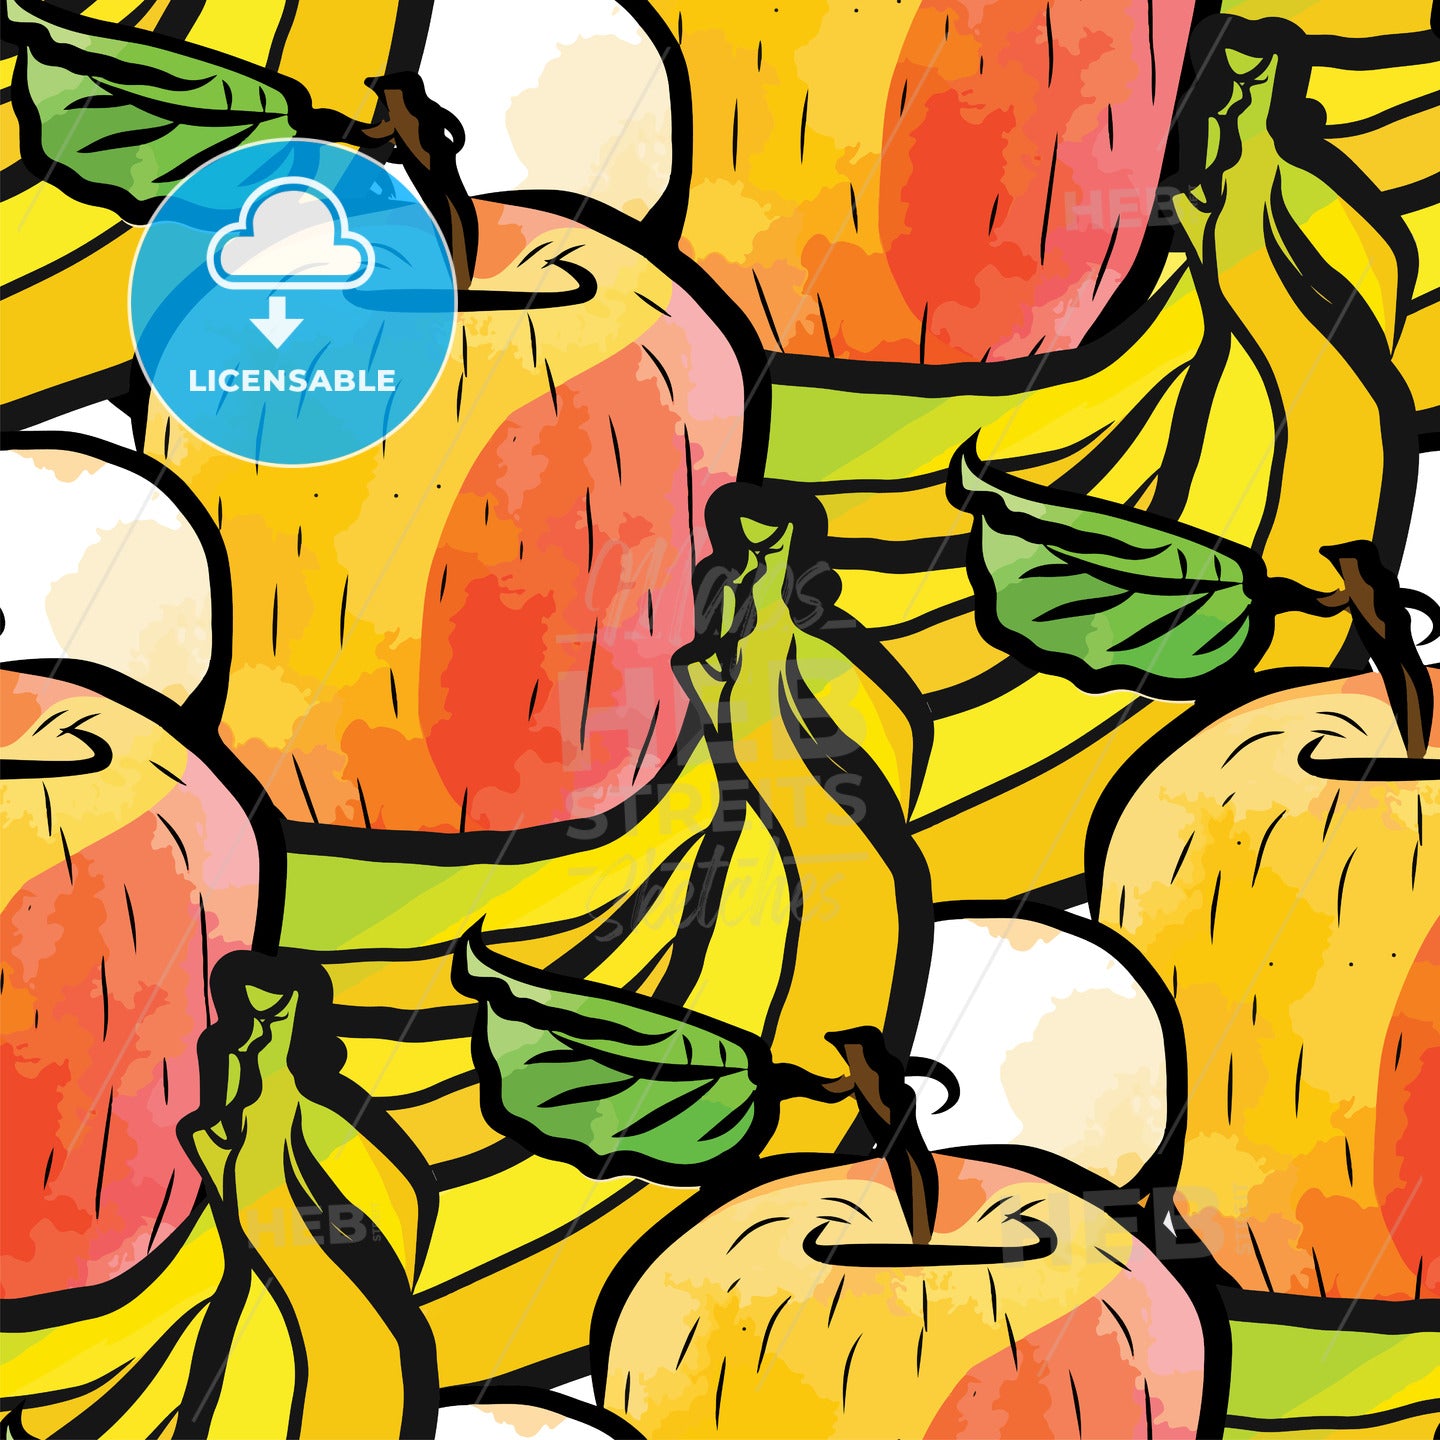 seamless pattern of bananas and apples – instant download